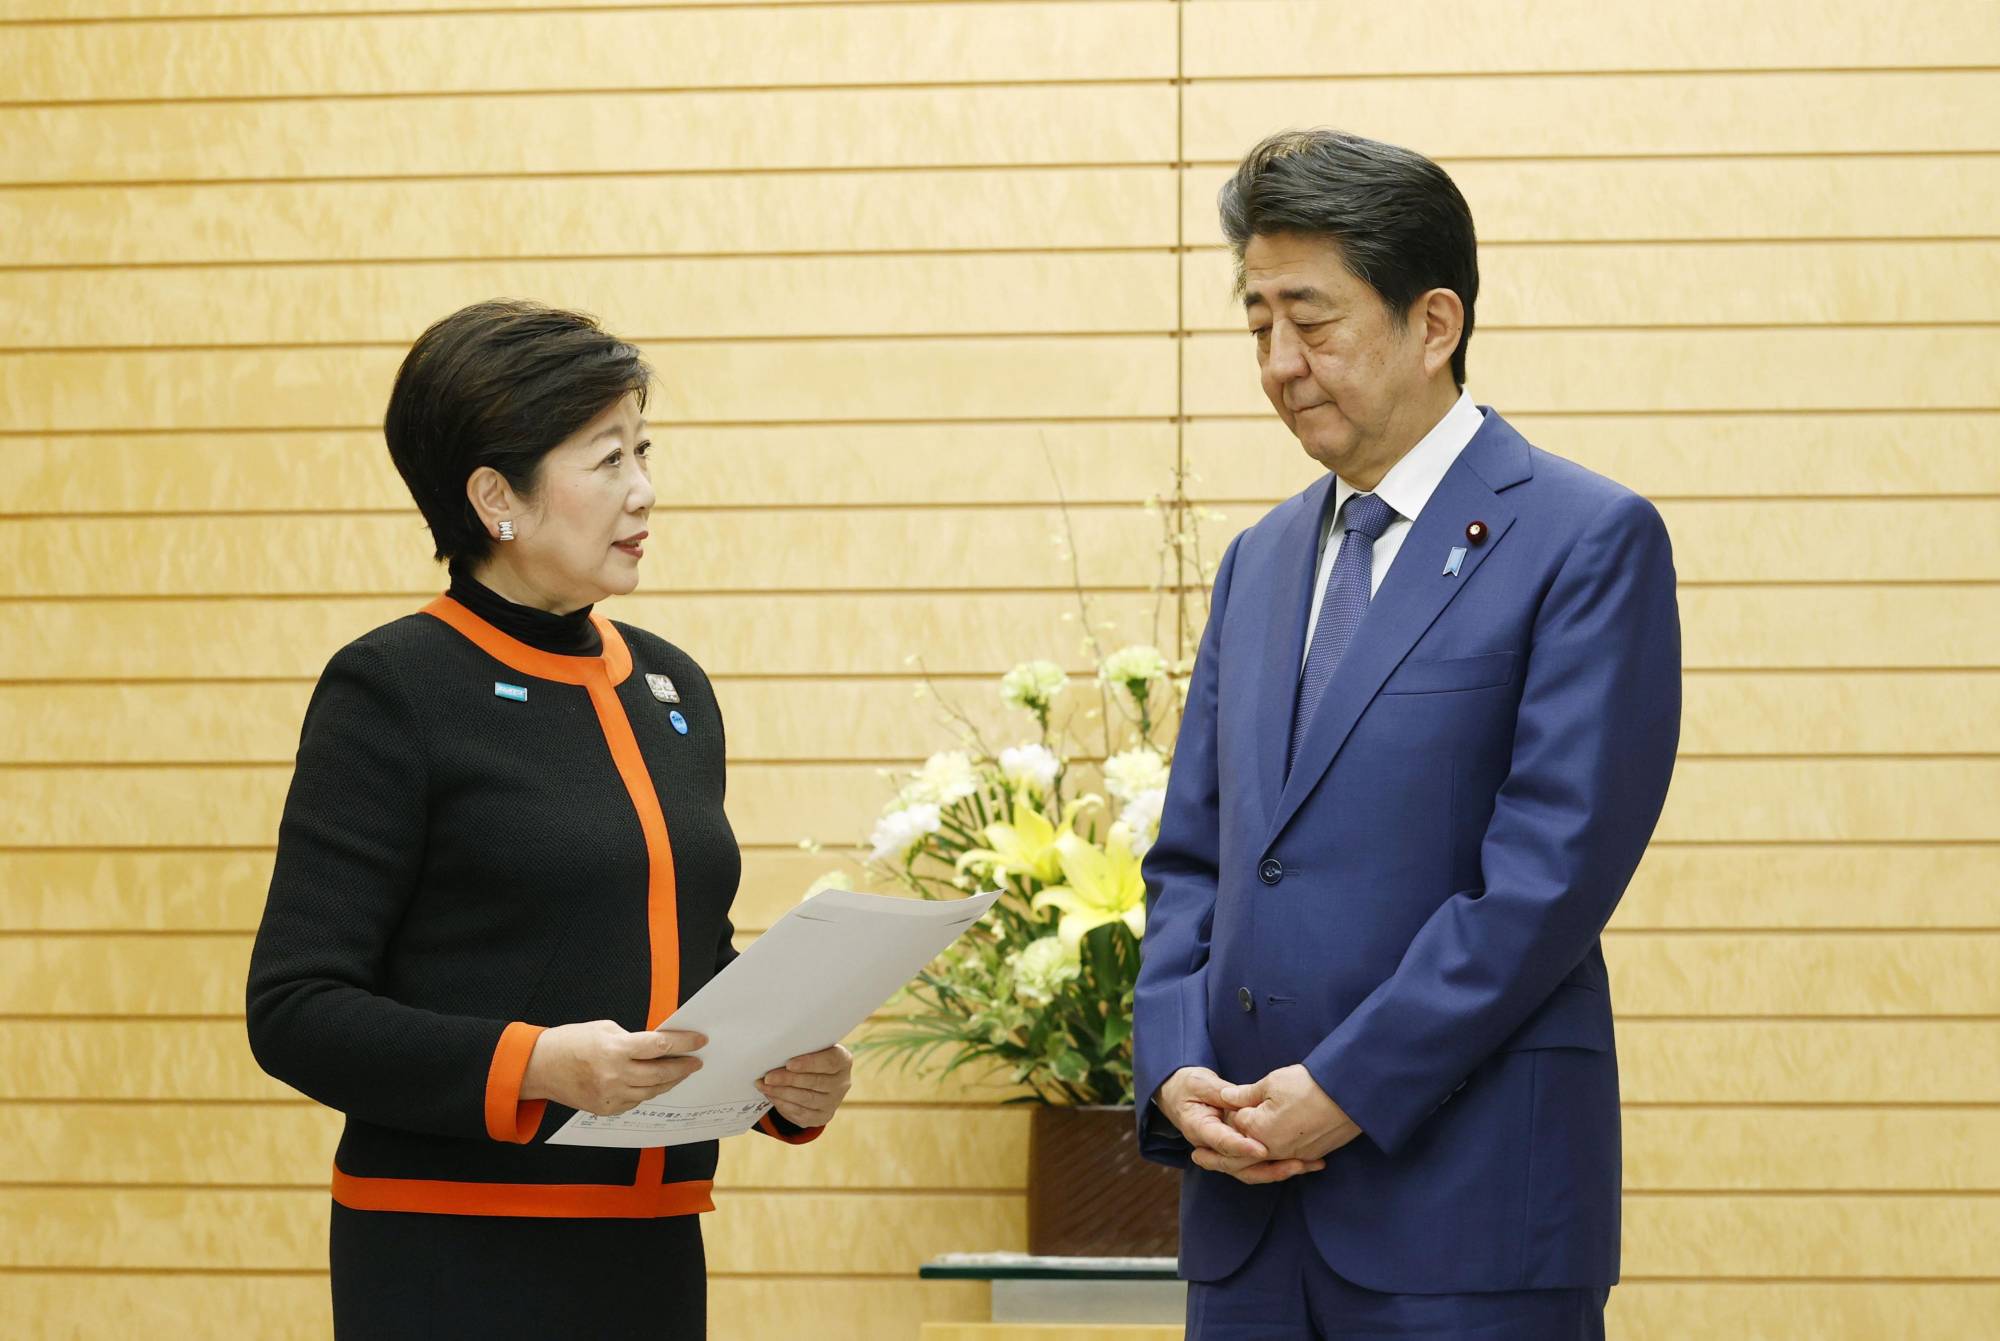 Tokyo Gov. Yuriko Koike submits requests regarding the COVID-19 outbreak control to Prime Minister Shinzo Abe at his office in Tokyo on March 26. | KYODO